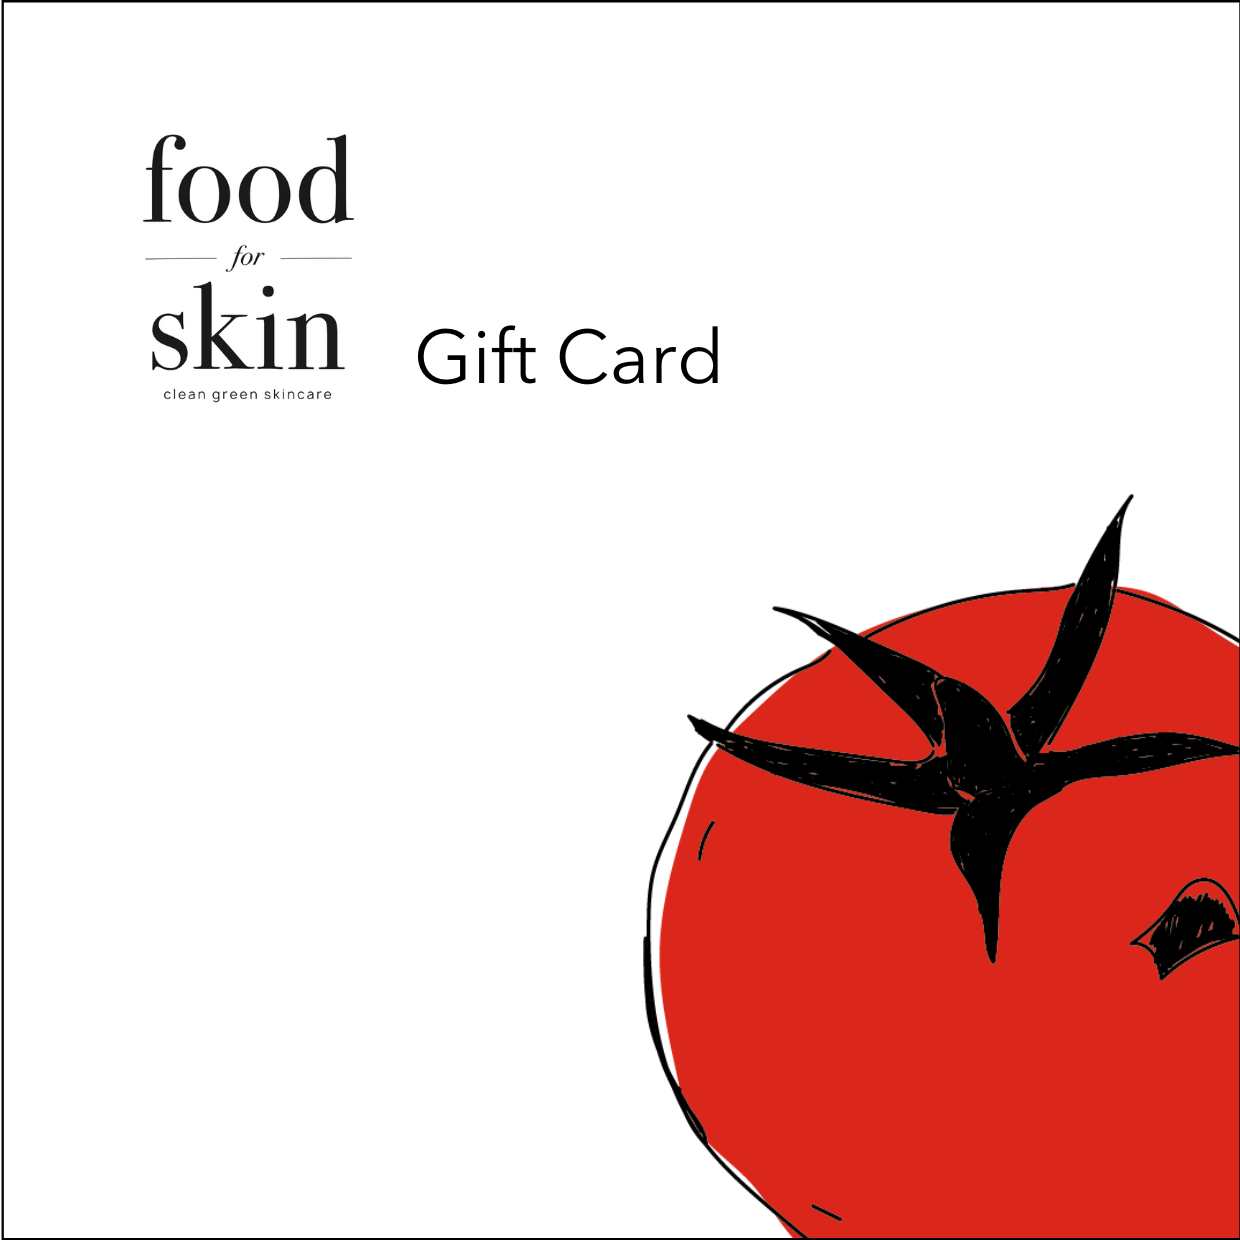 Food for Skin gift card